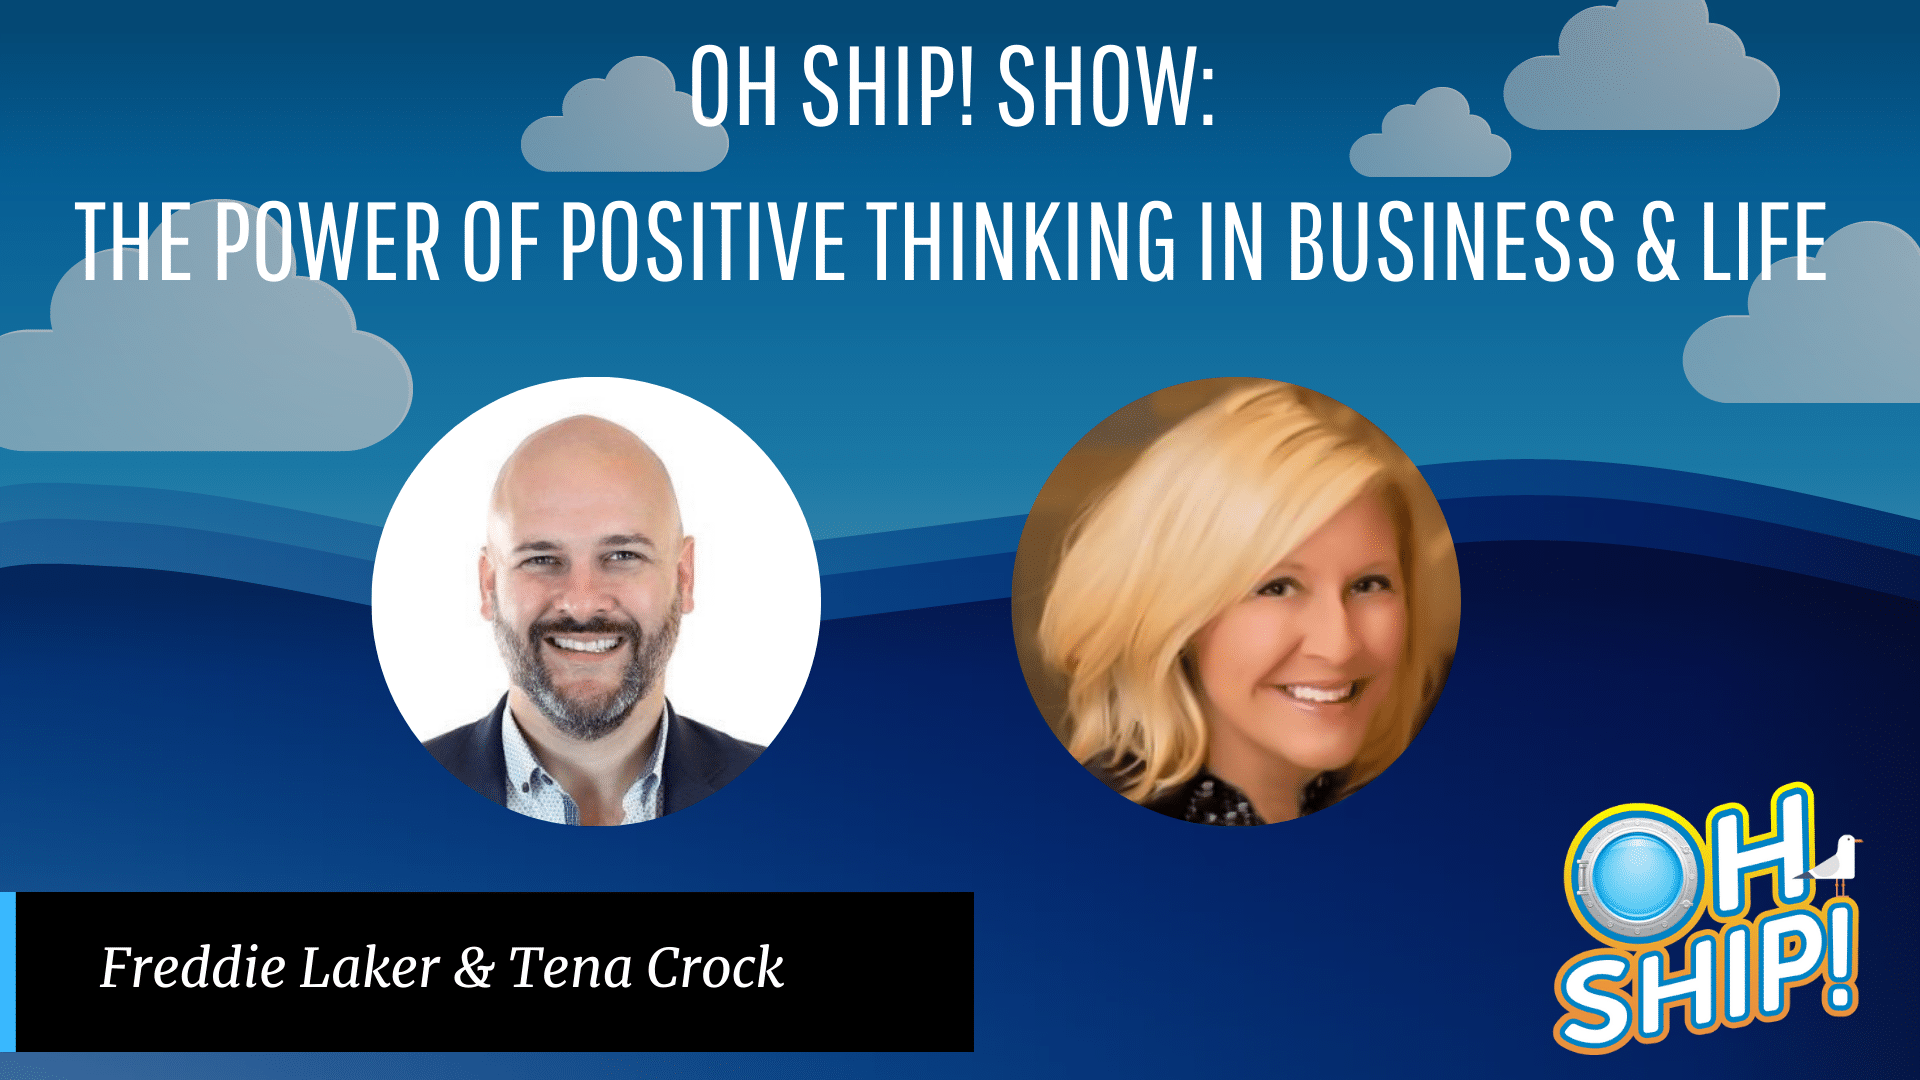 Promotional image for "Oh Ship! Show" with the topic "The Power of Positive Thinking in Business & Life." Features headshots of two hosts, Freddie Laker and Tena Crock, on a blue background with clouds. The show title, host names, and insights into Business and Life are displayed.